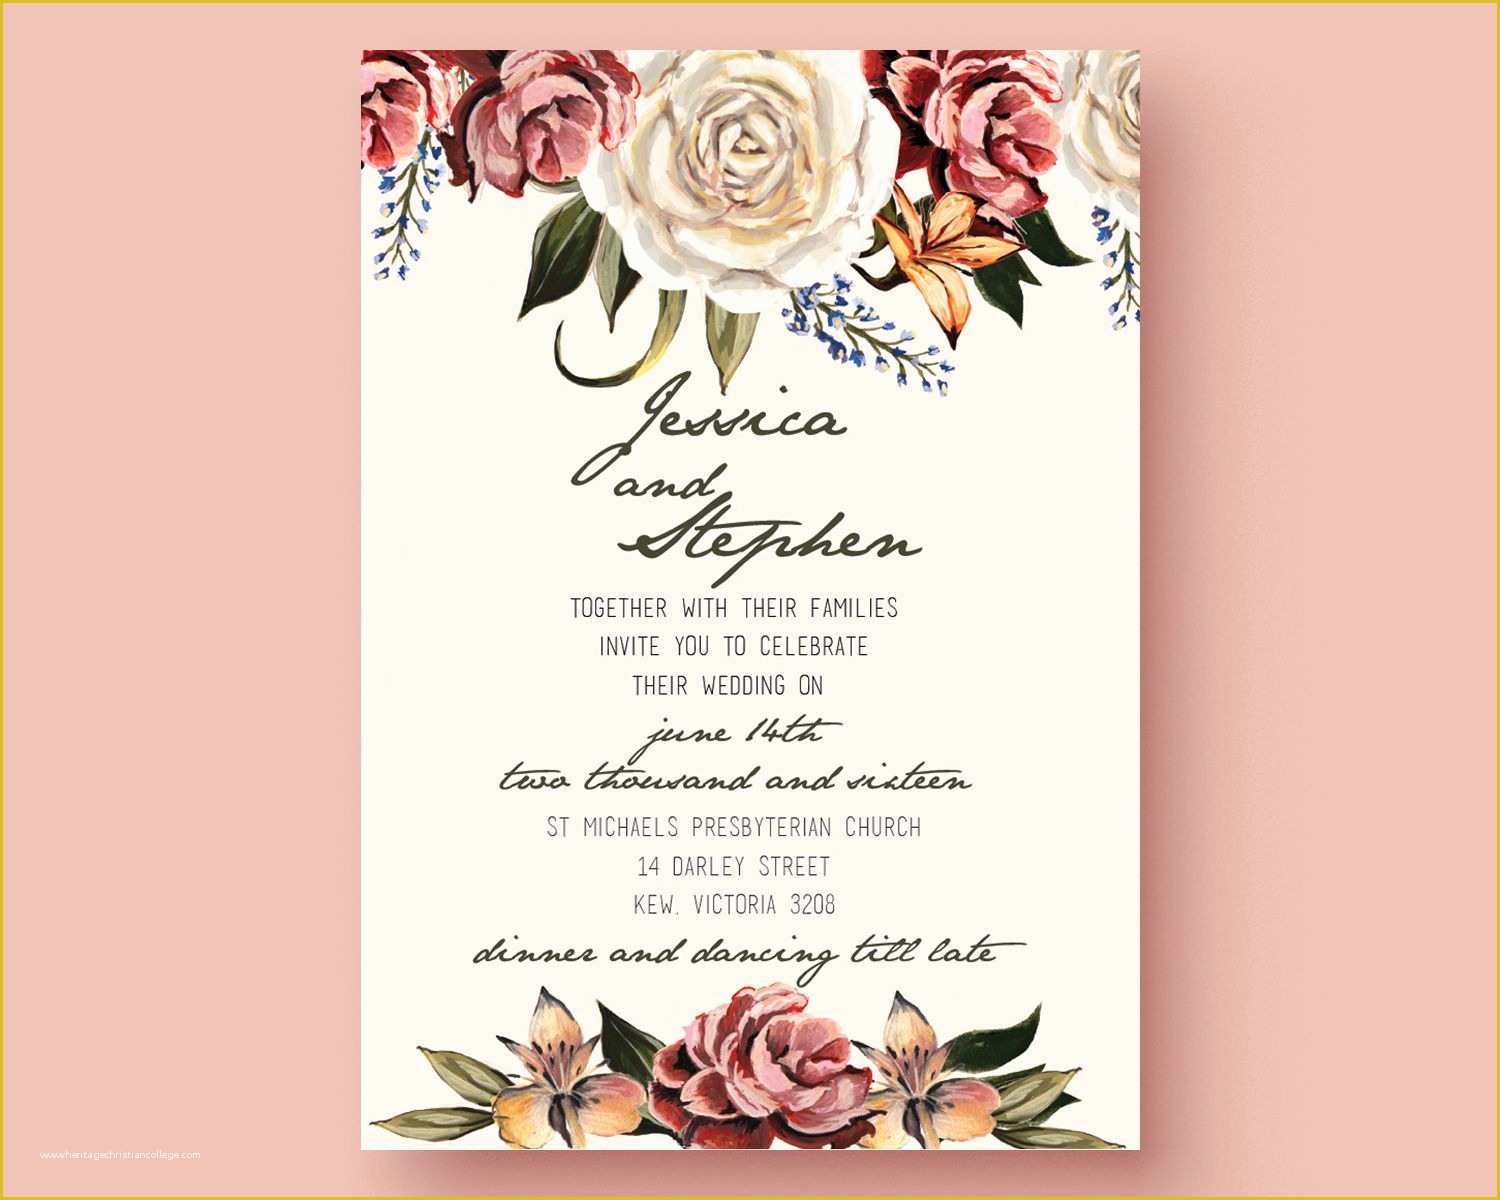 Typography Invitation Template Free Of Get the Template Free This is An Adobe